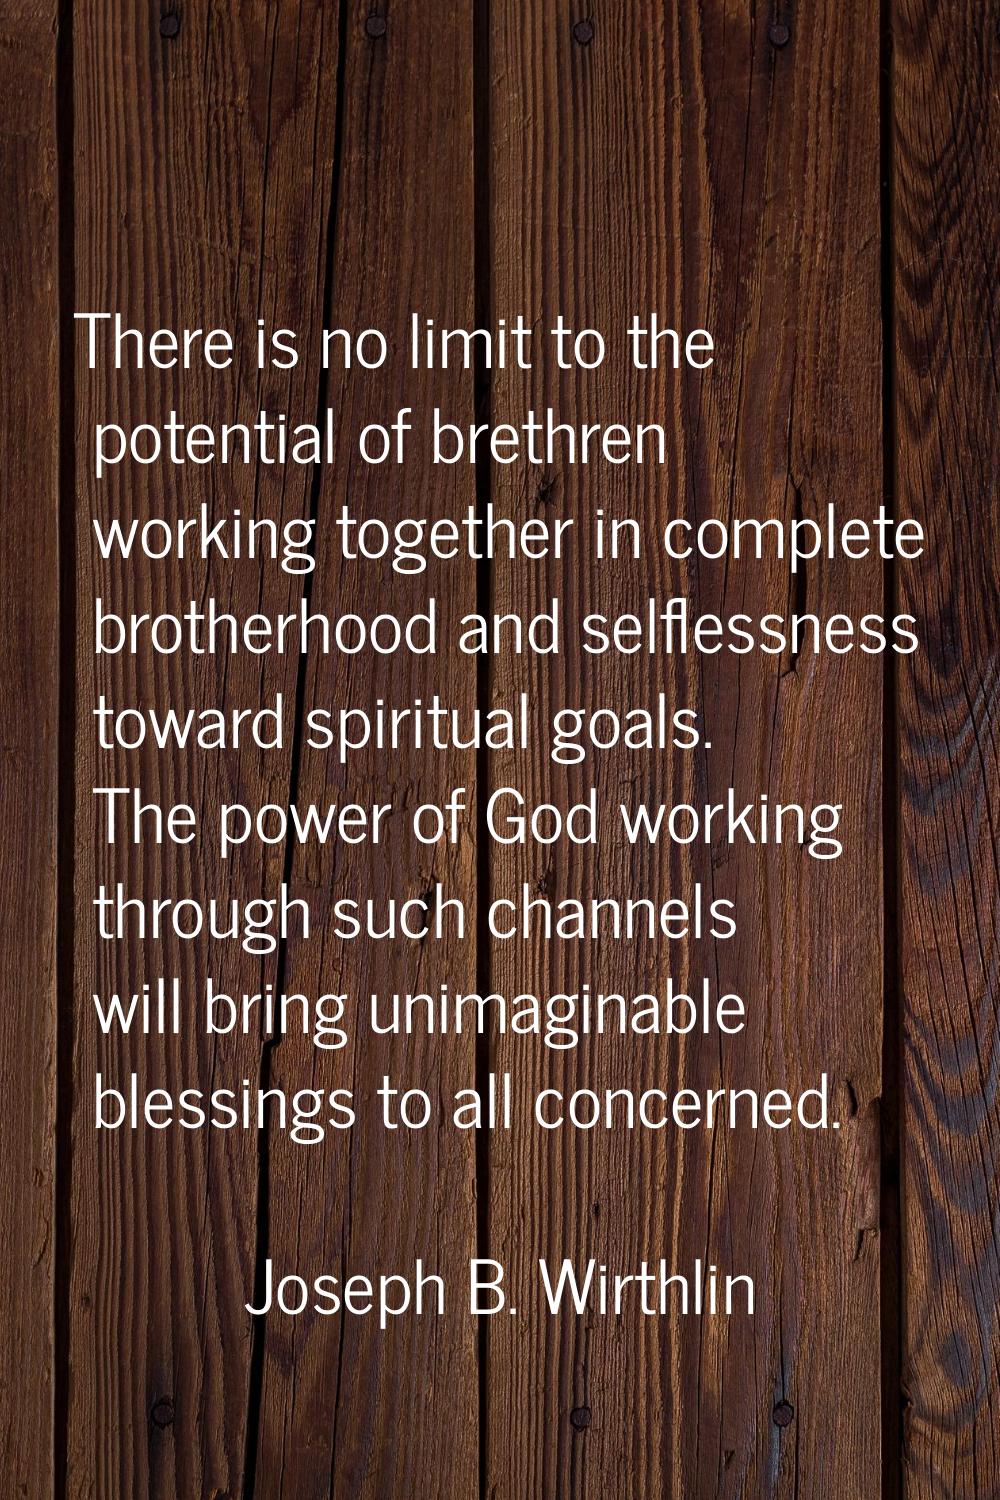 There is no limit to the potential of brethren working together in complete brotherhood and selfles